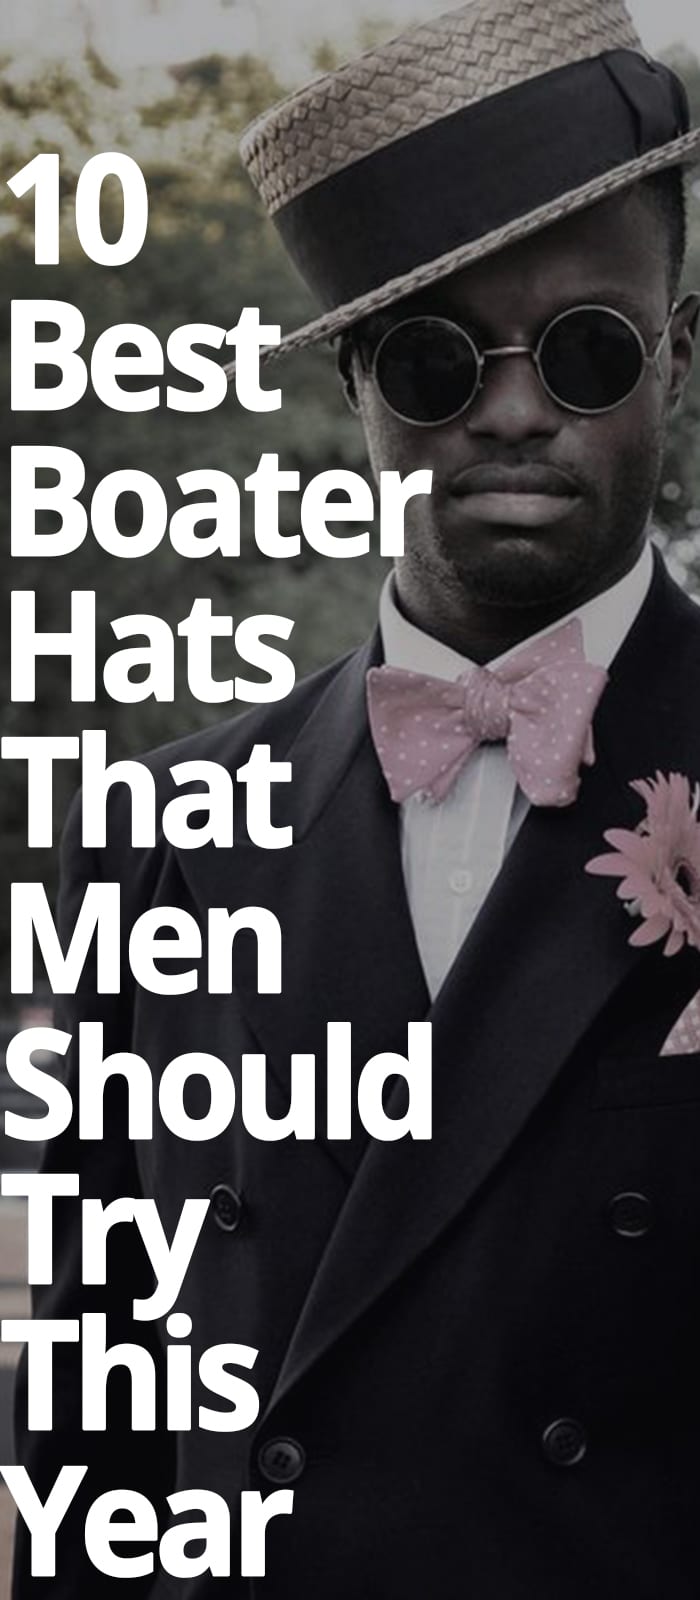 BEST BOATER HATS THAT MEN SHOULD TRY THIS YEAR